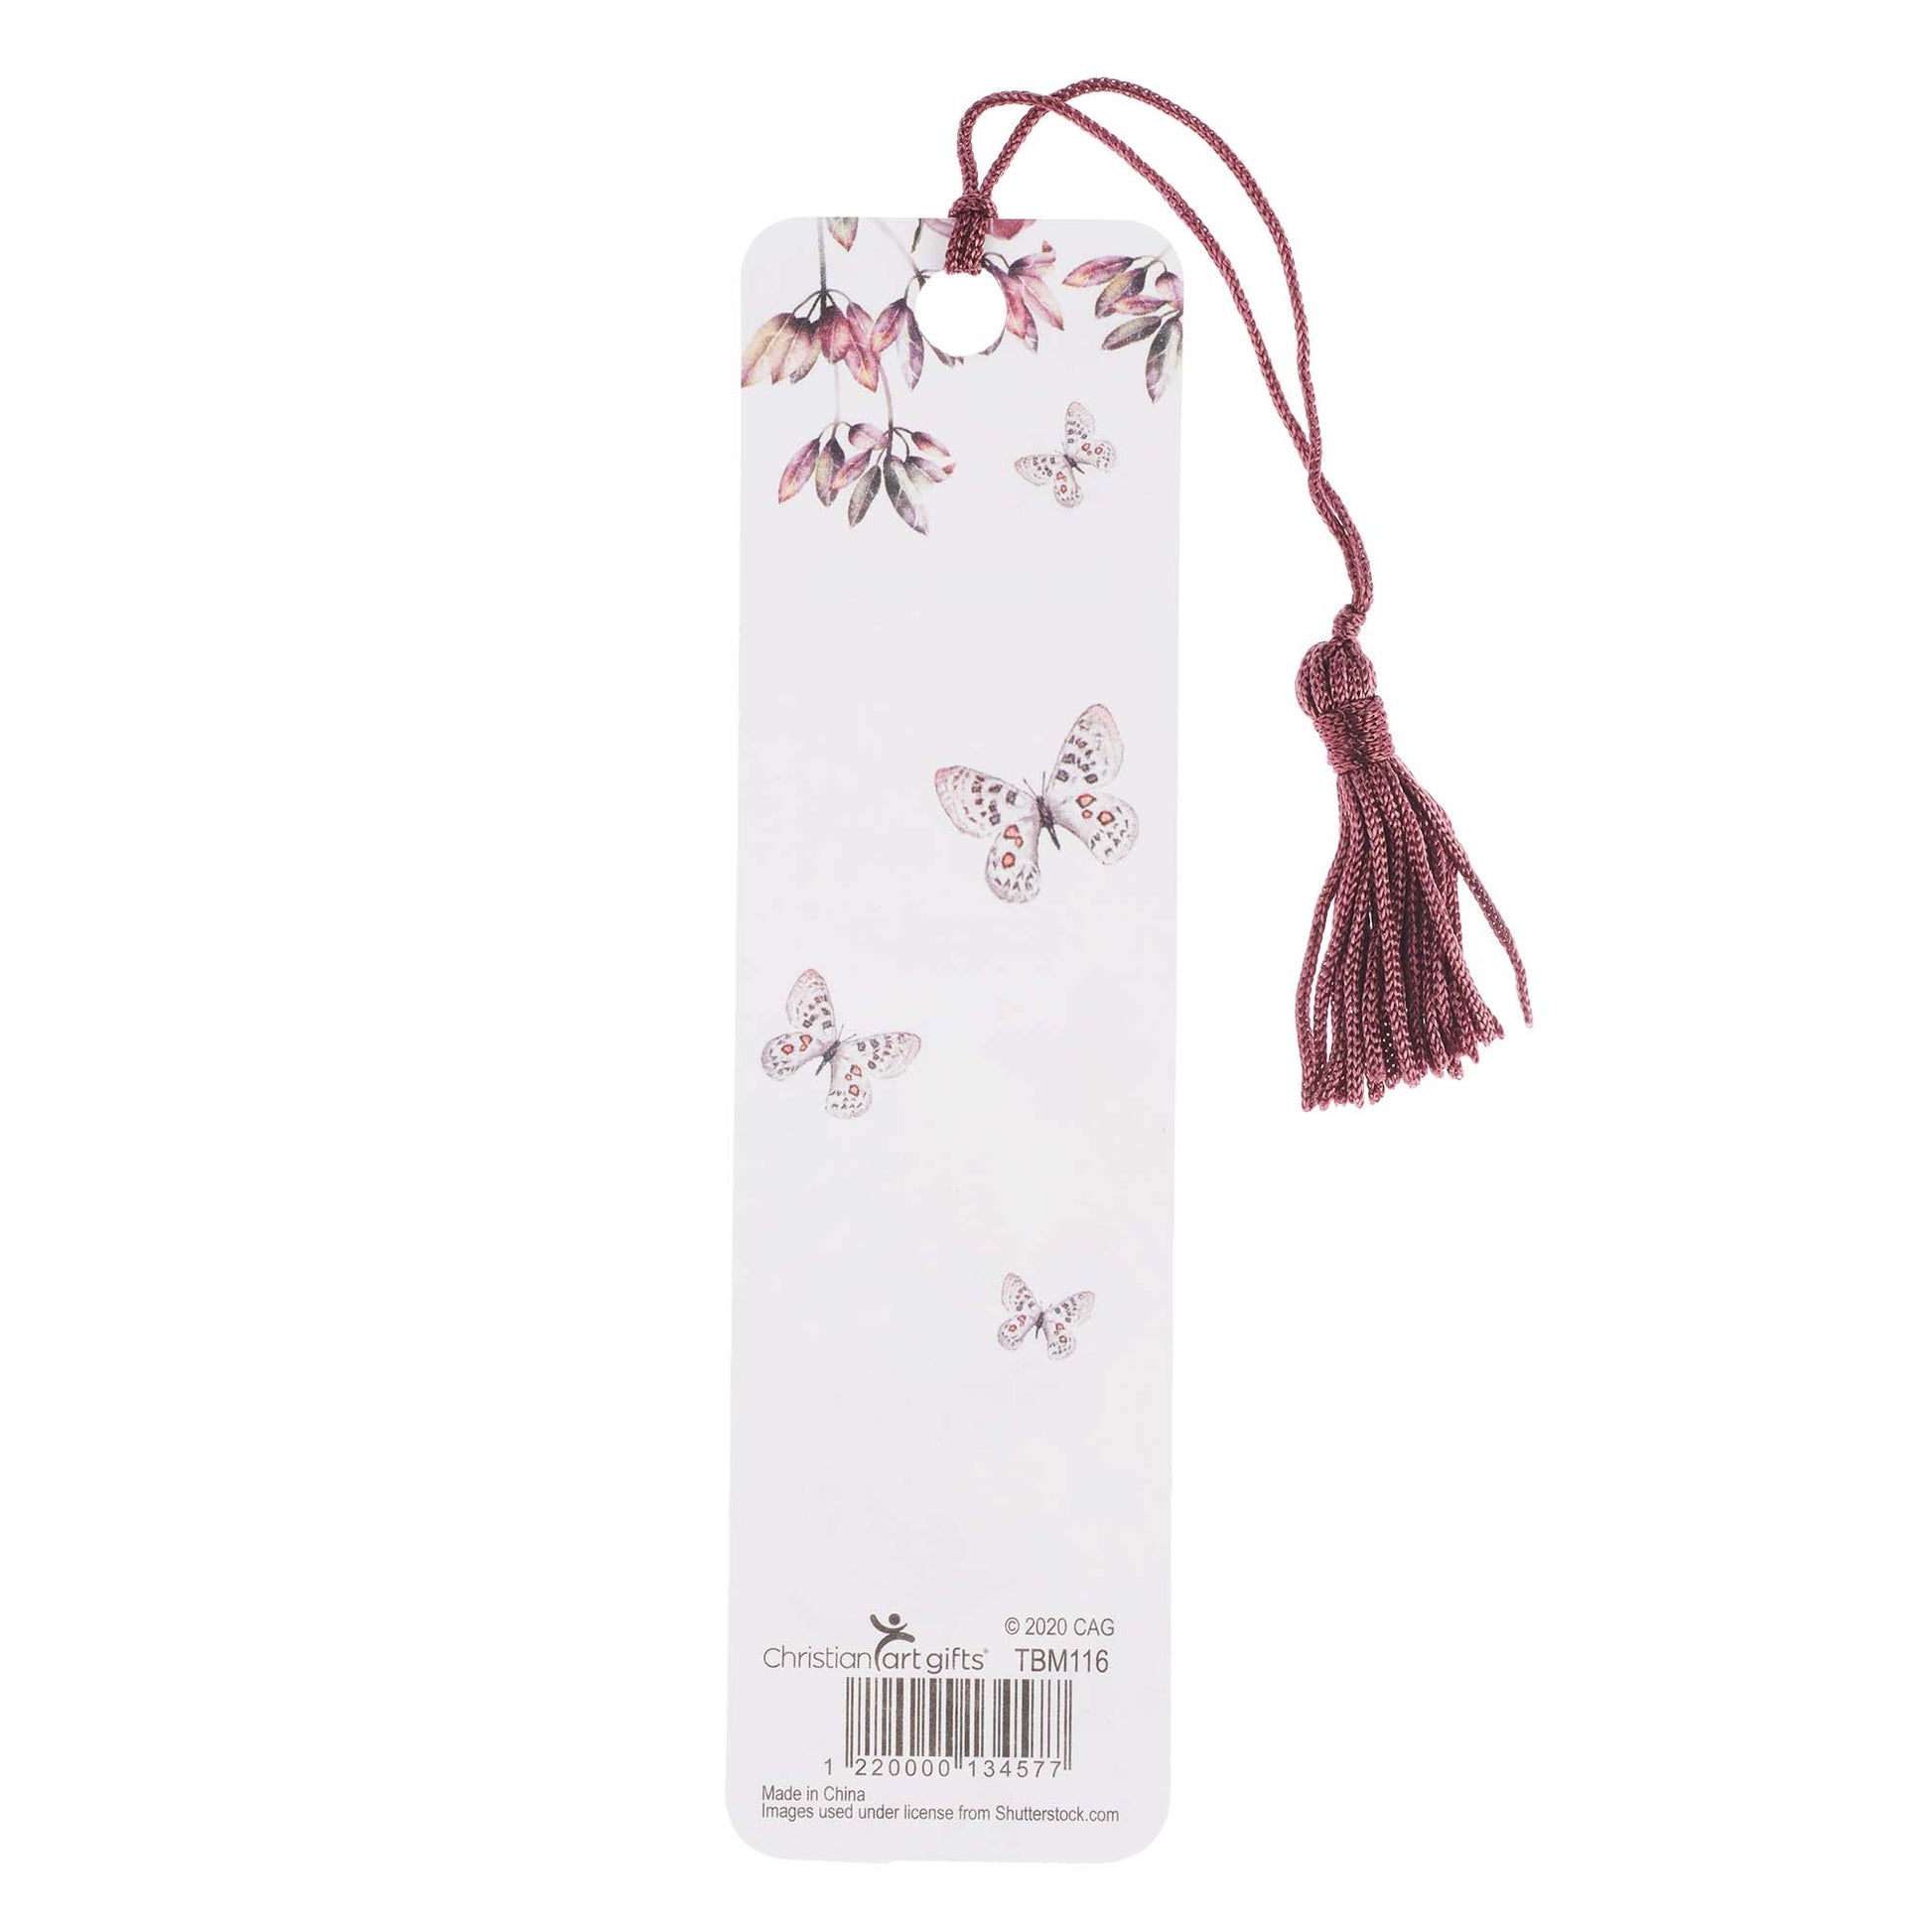 Everything Beautiful Bookmark with Tassel - Ecclesiastes 3:11 - The Christian Gift Company